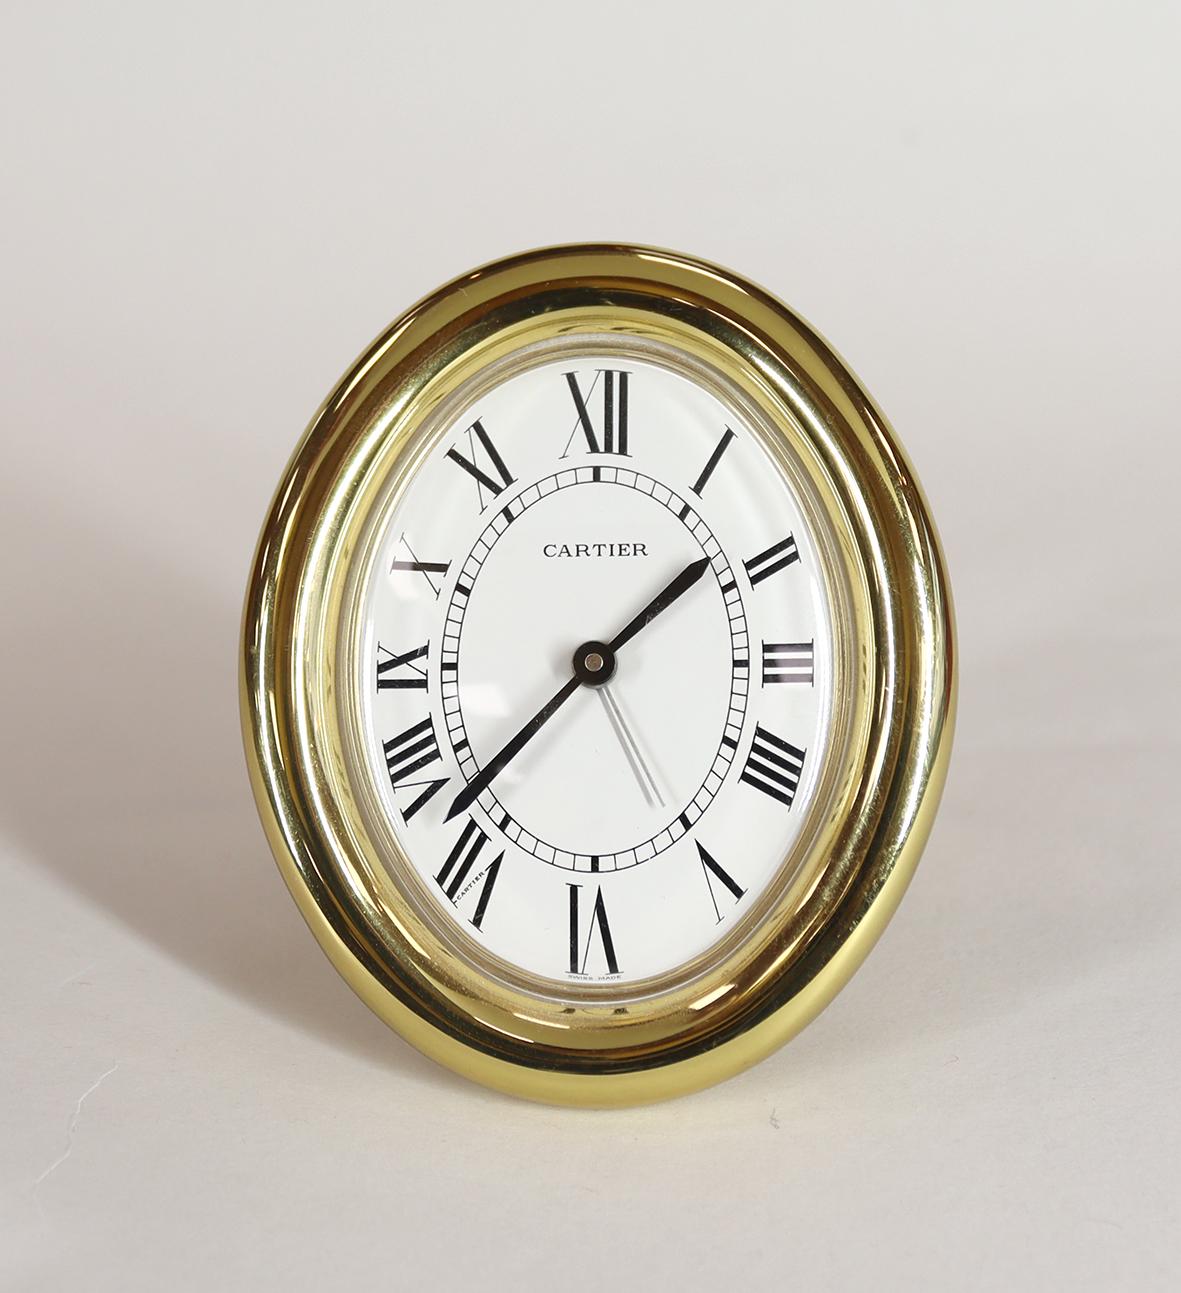 A Cartier Les Must Alarm Clock in an oval gold plated frame, with cabochon jewelled setting nuts, resting on a strut back with the distinctive Cartier ‘C’ forming the feet.

This Swiss made quartz clock stamped ‘Cartier a Paris’ comes with it’s